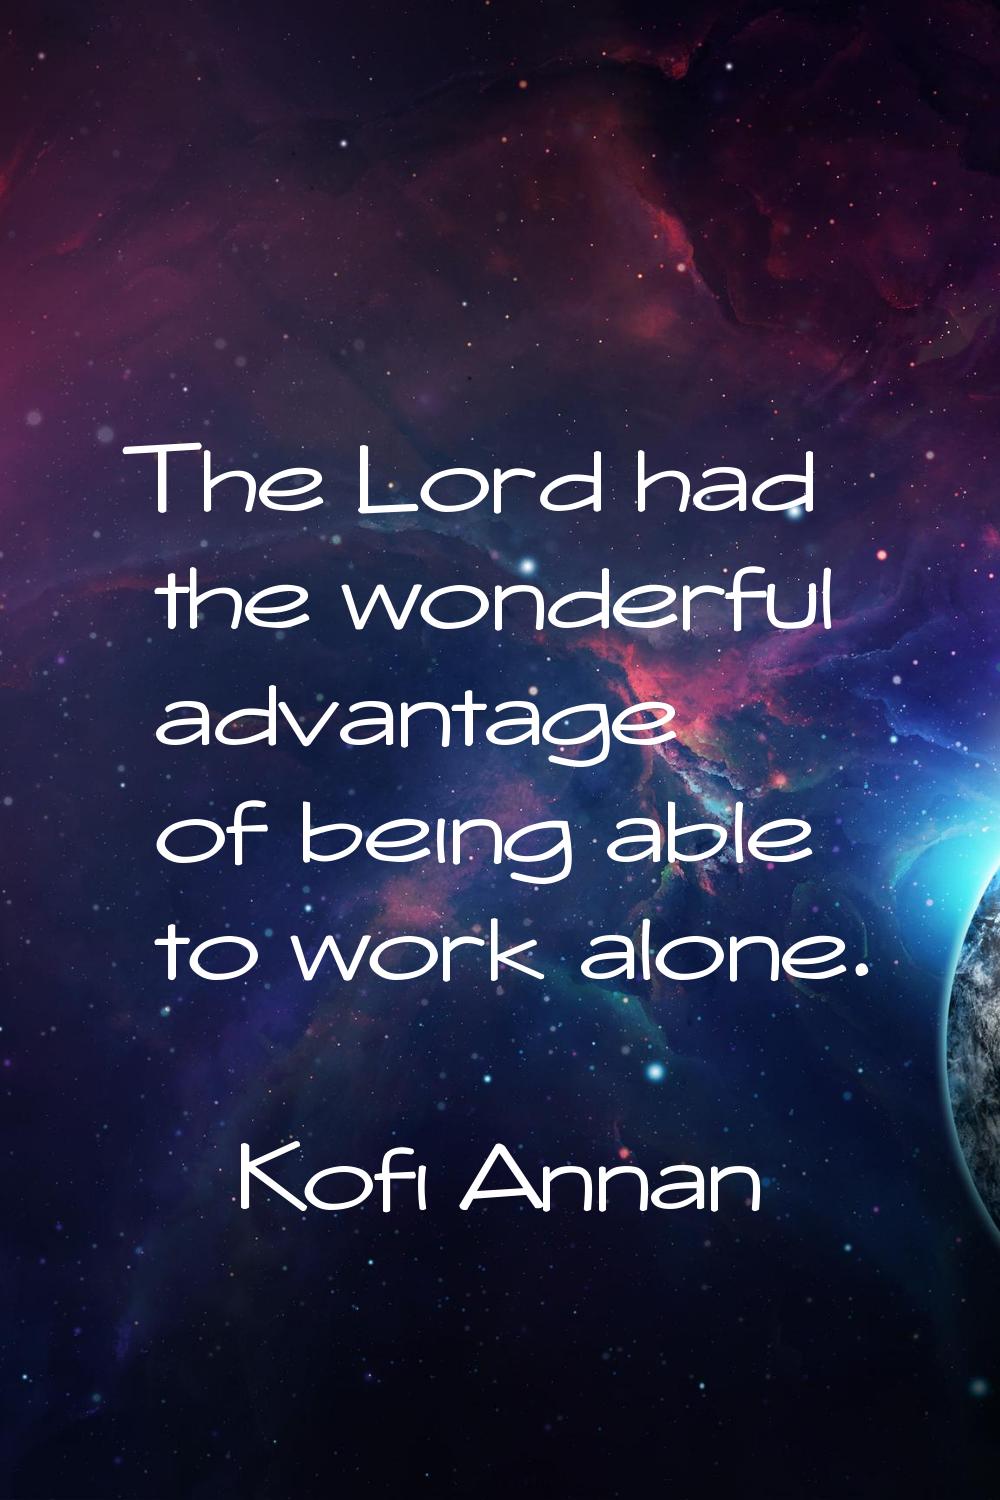 The Lord had the wonderful advantage of being able to work alone.